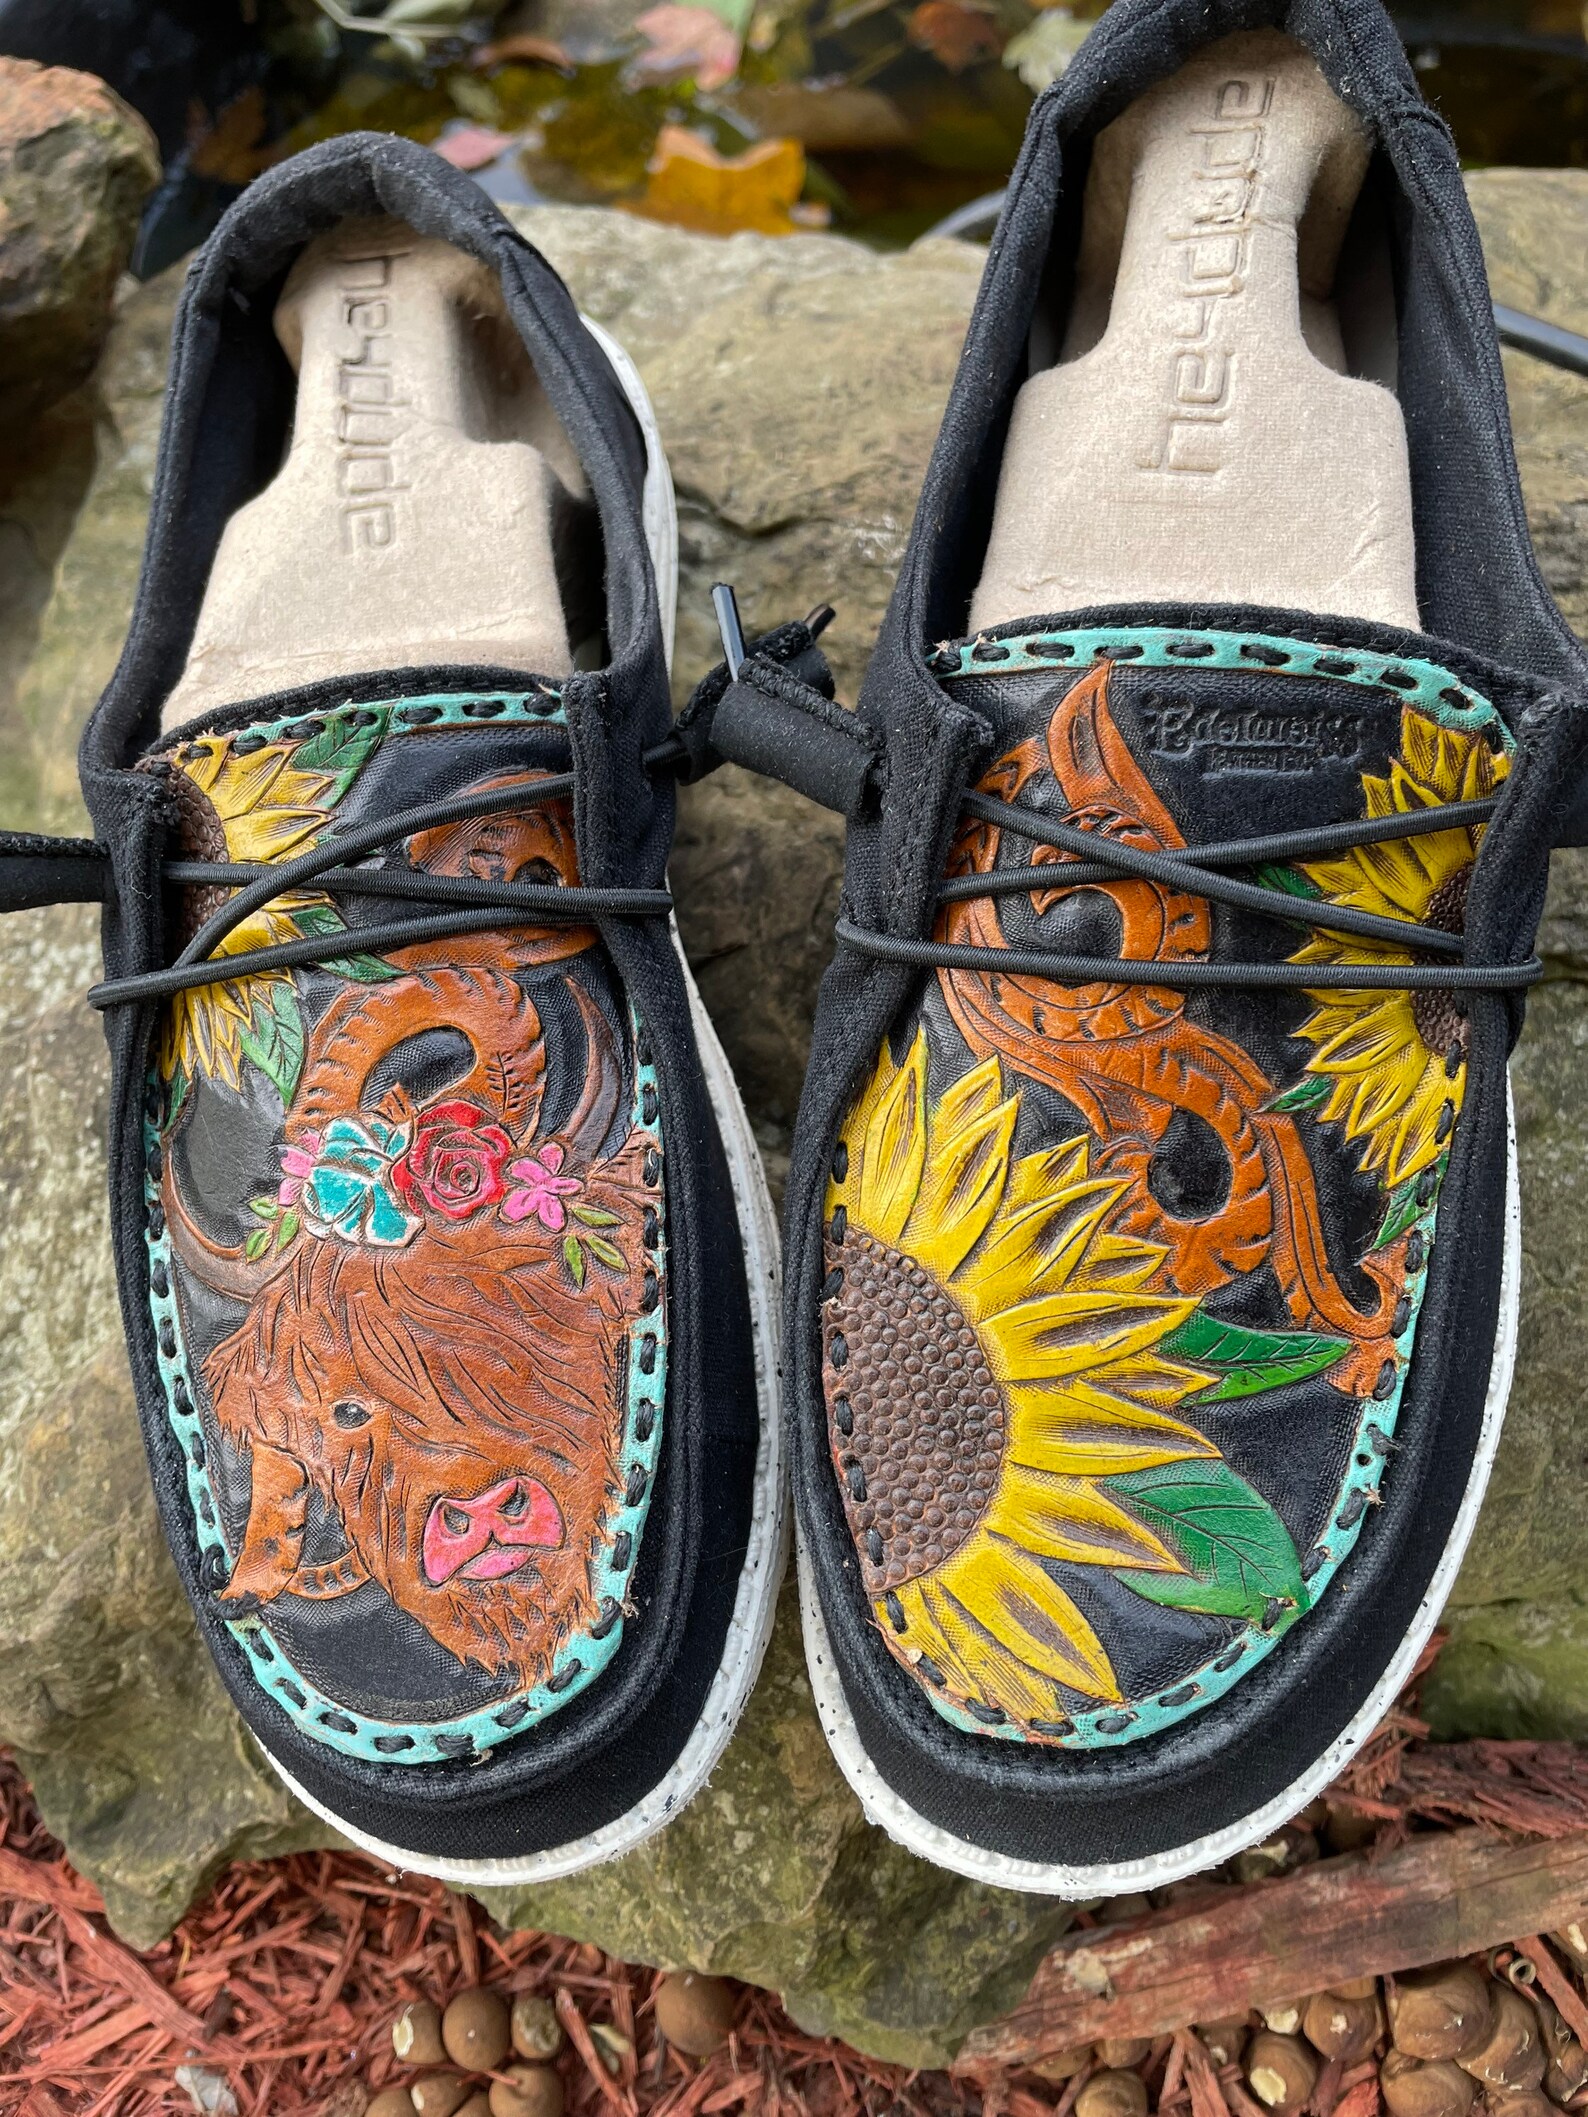 Custom Tooled Hey Dude Shoe Toppers. - Etsy